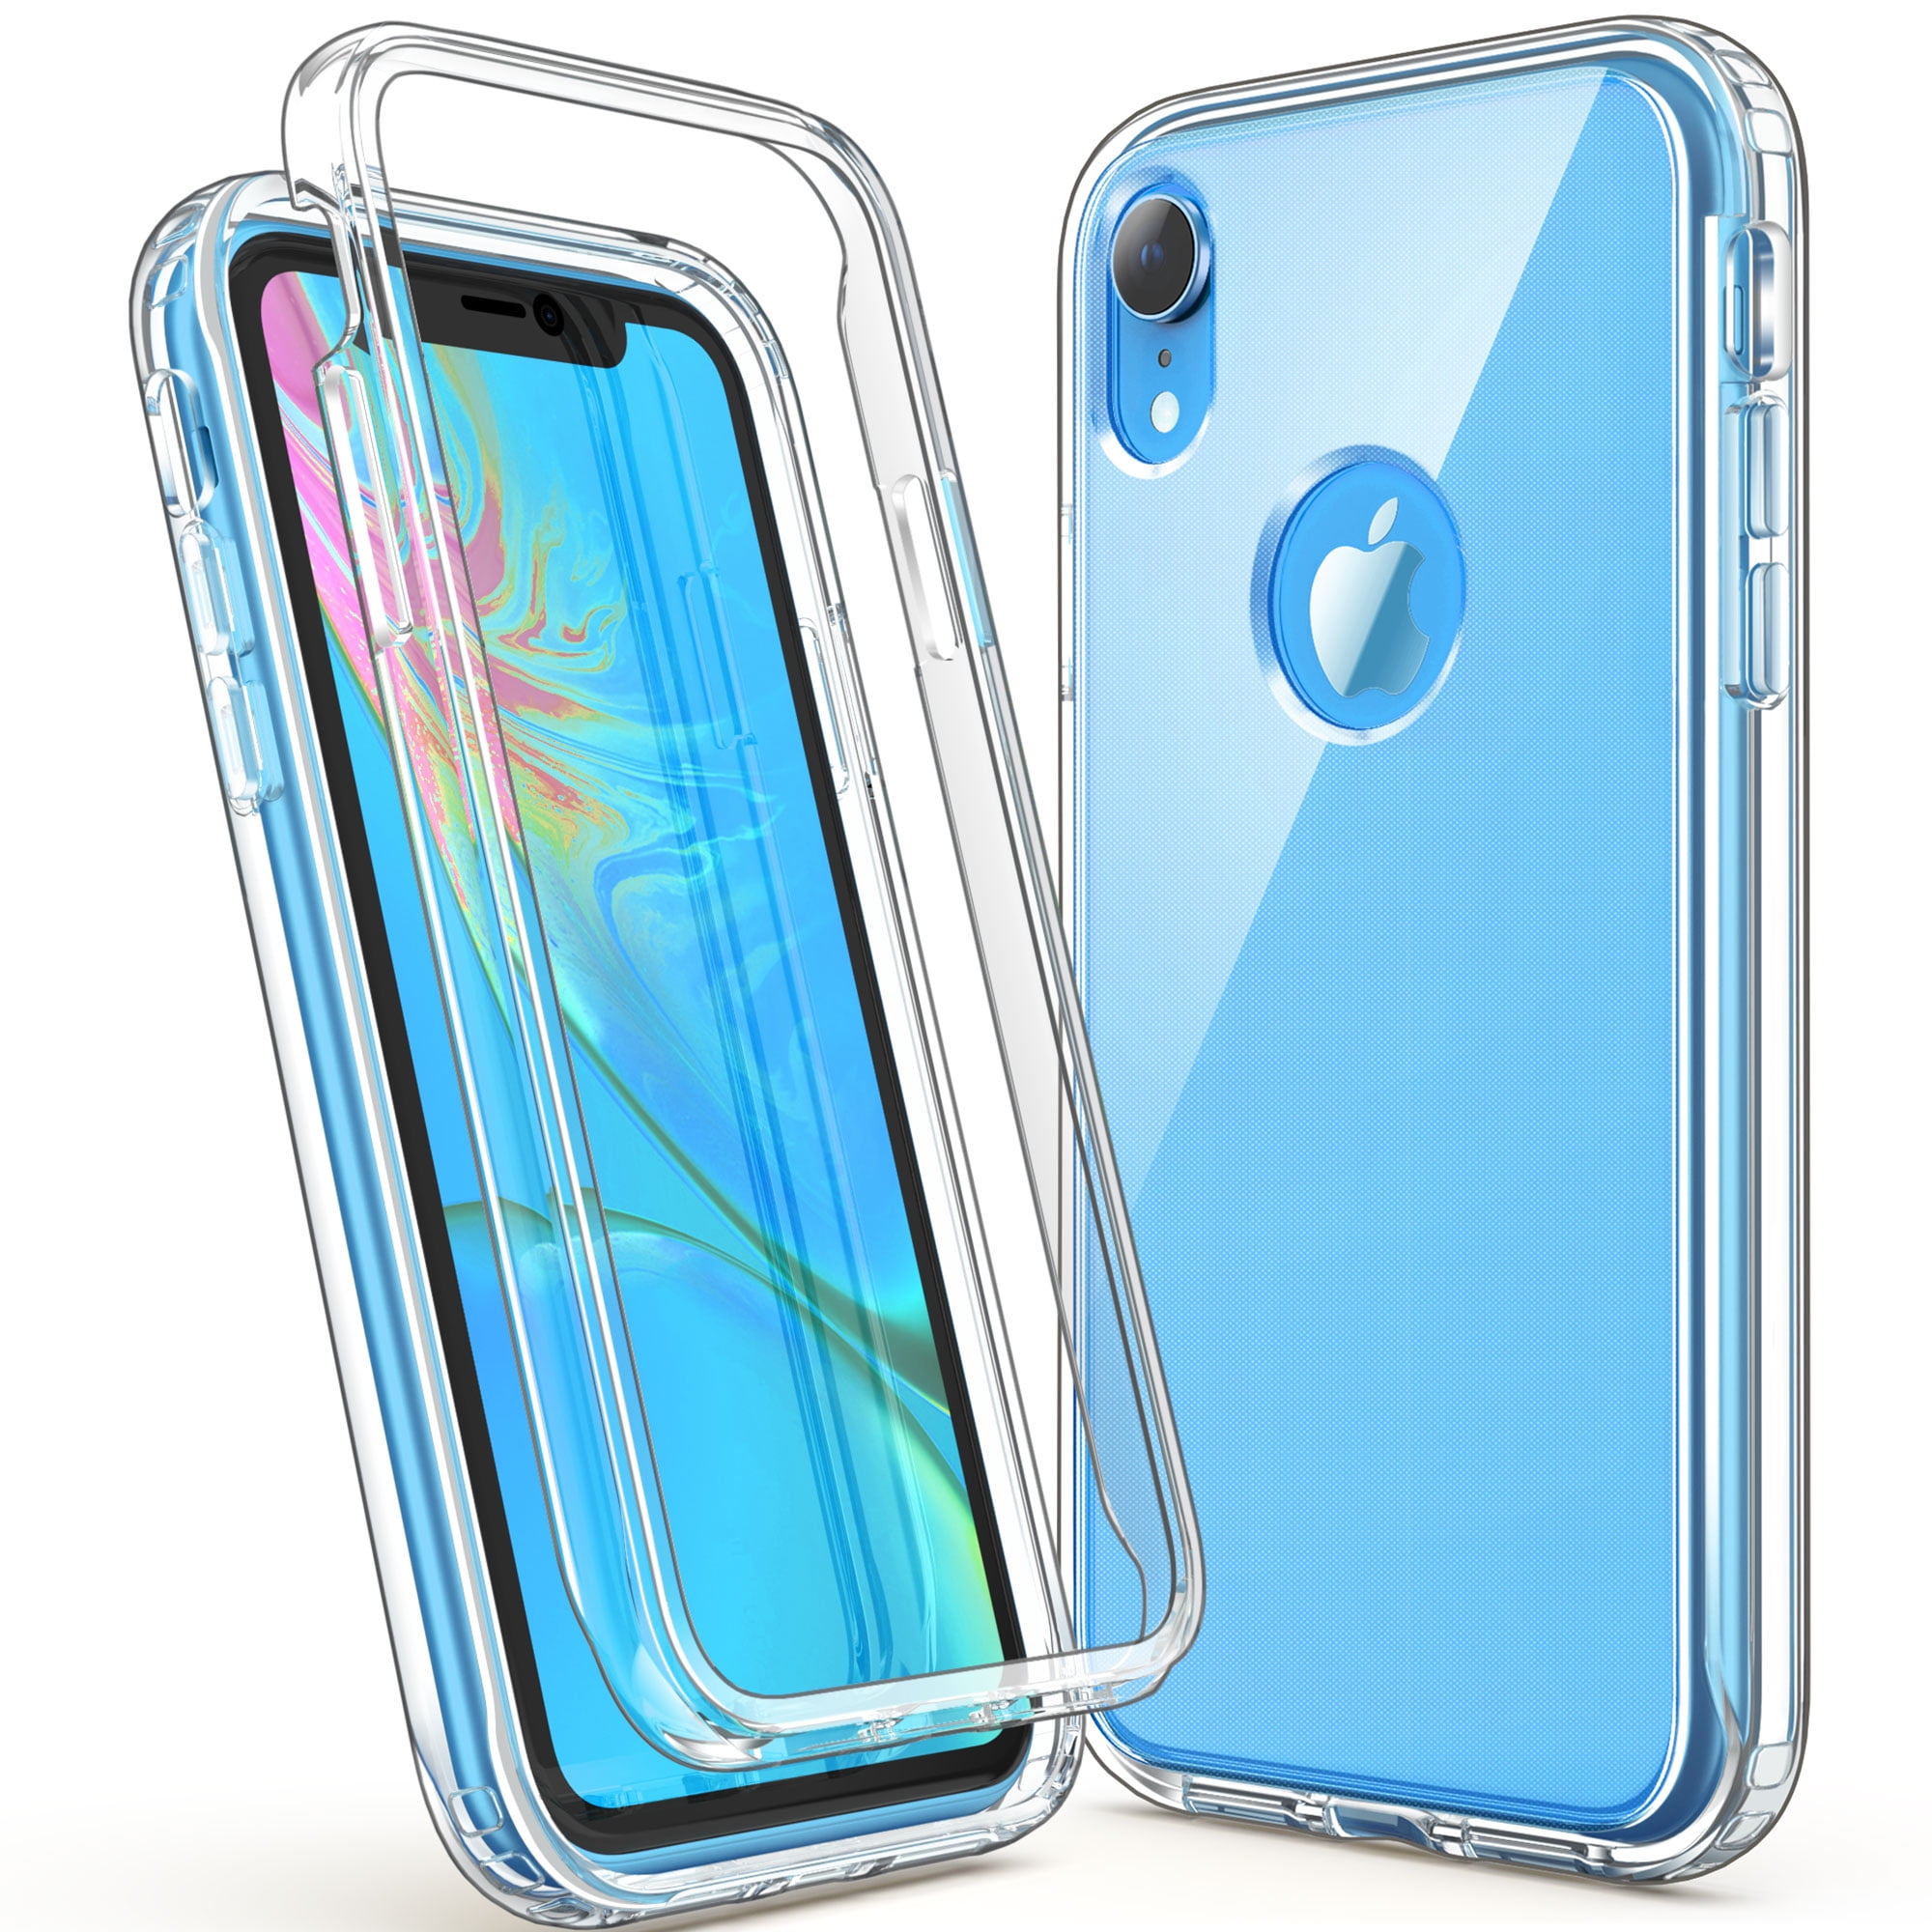 Ulak Iphone Xr Case, Stylish Heavy Duty Hybrid Hard Pc Back Cover And Front  Bumper Frame Phone Case For Apple Iphone Xr 6.1 Inch For Women Men Girls  Boys, Clear With Hole -